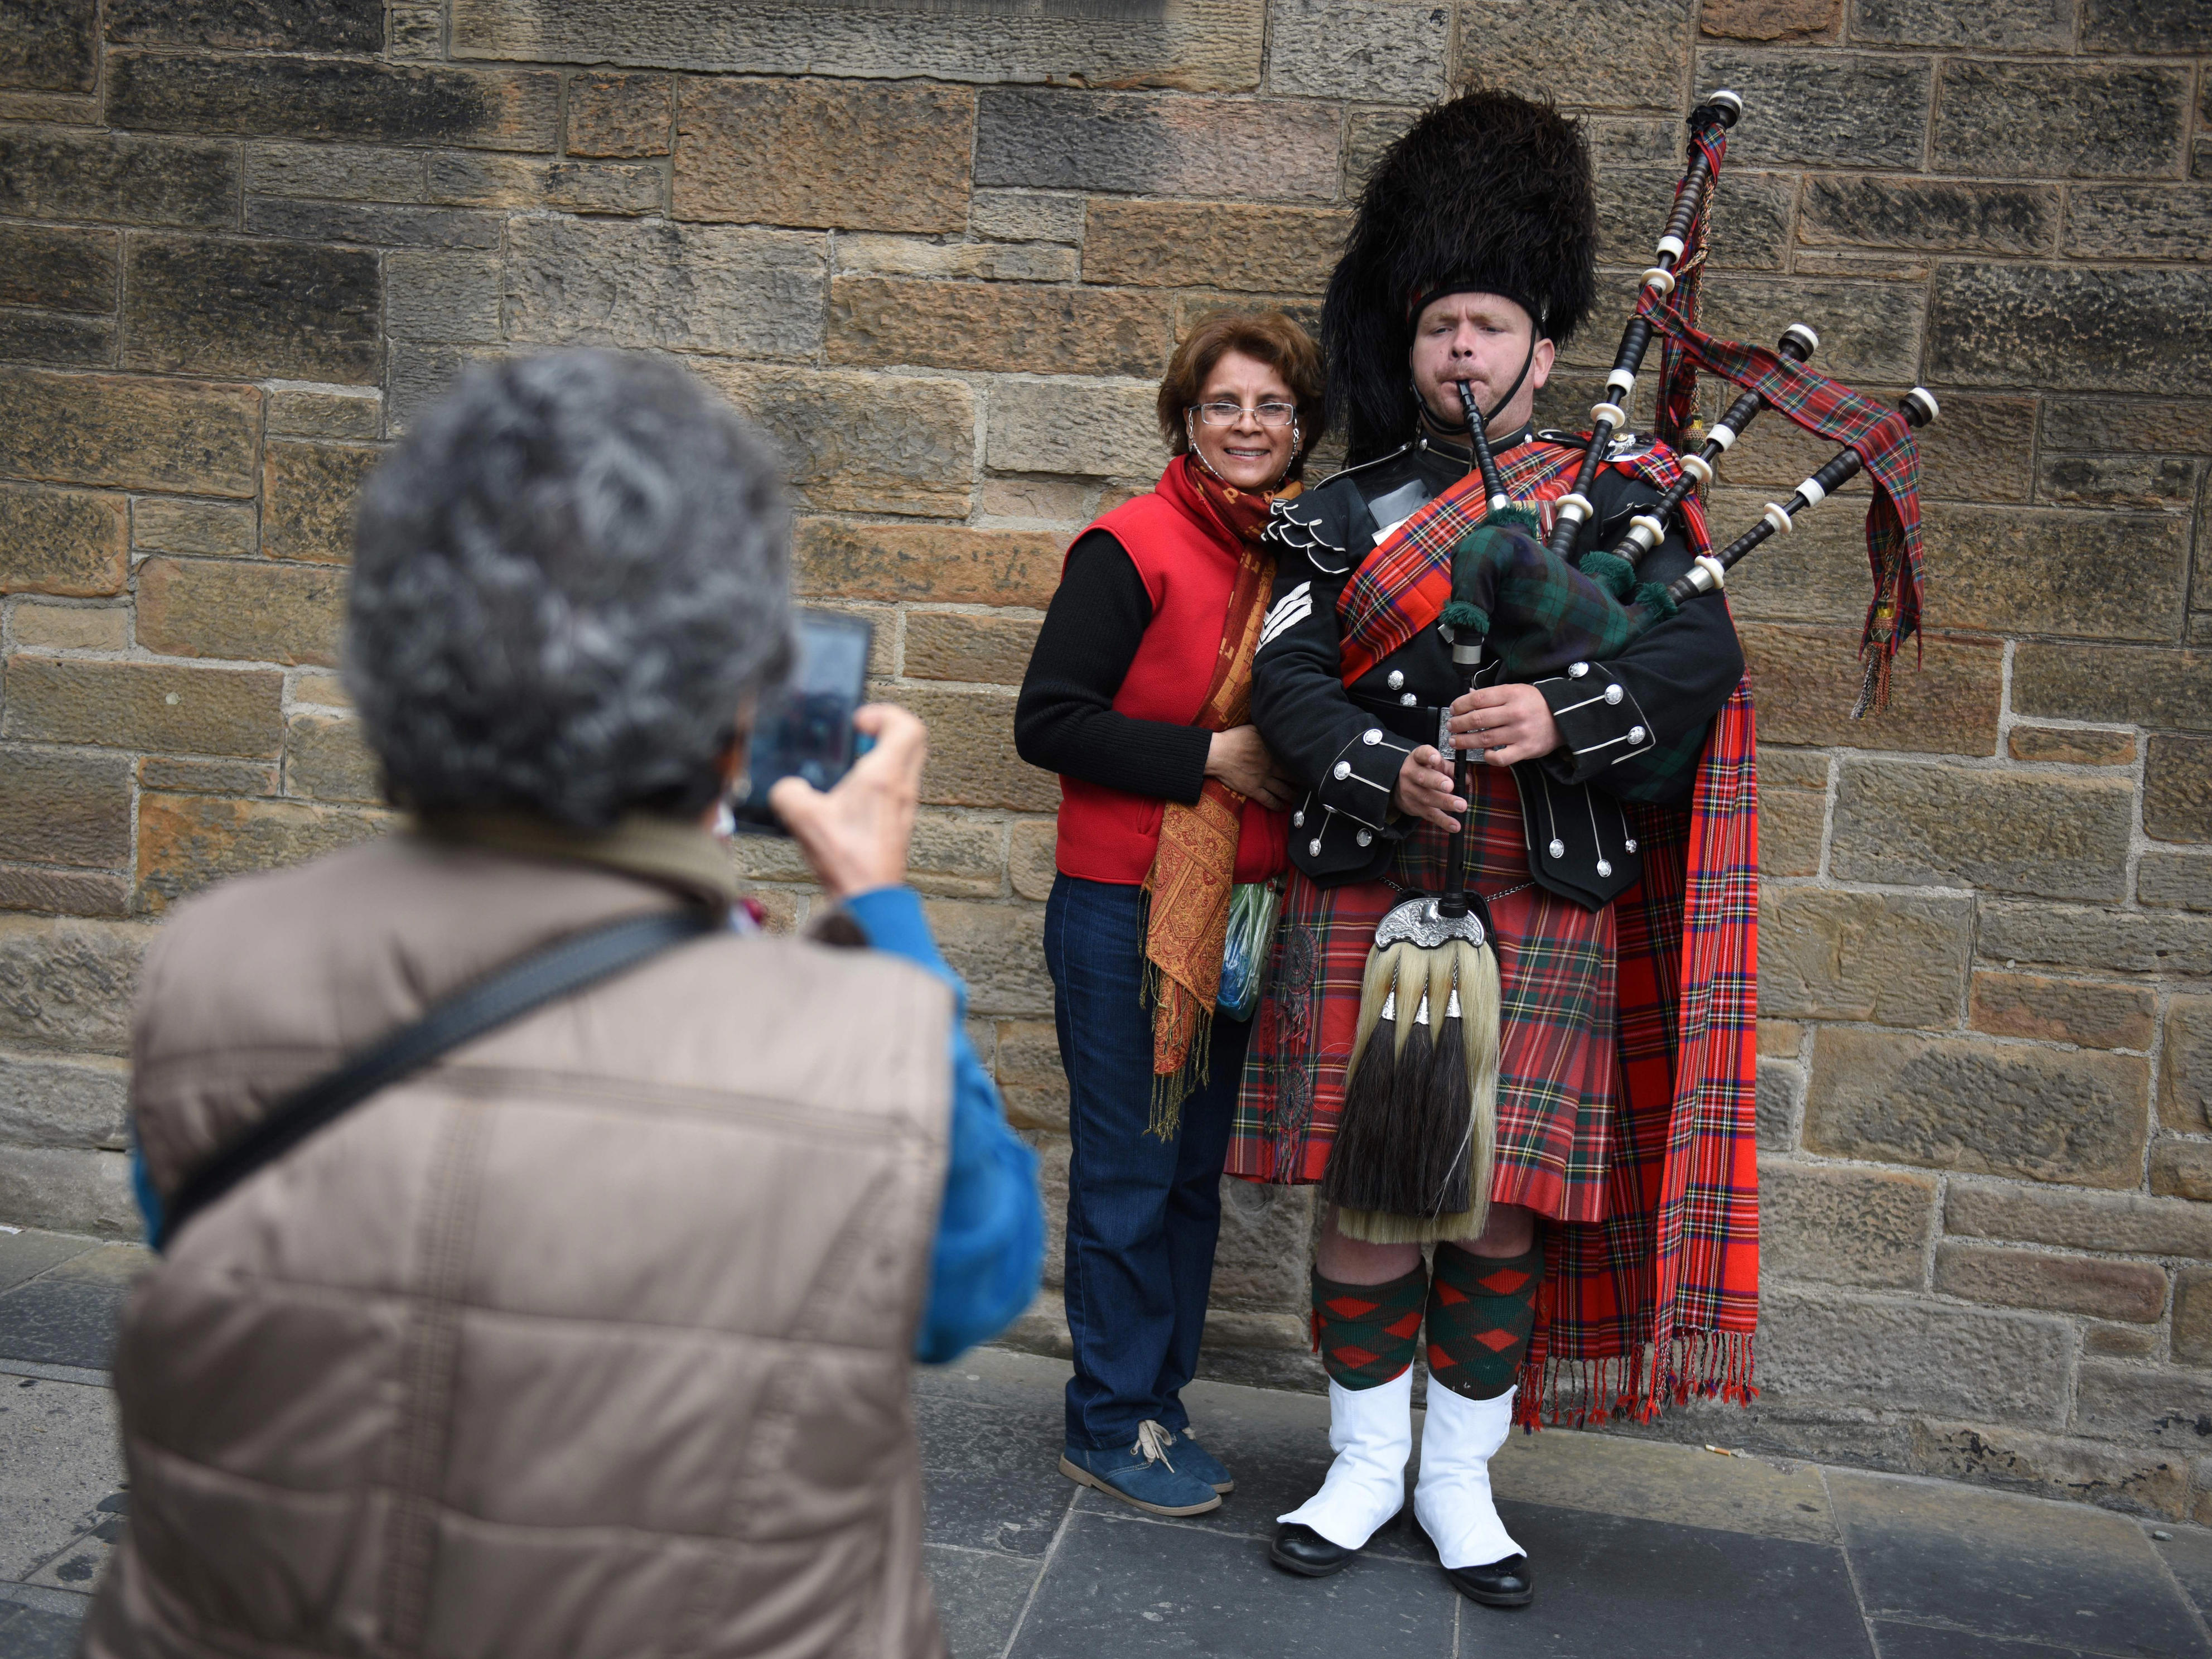 <p>Bagpipes are a traditional Scottish instrument that first became popular in the 14th century, according to the retailer <a href="https://www.kinnairdbagpipes.com/" rel="noopener">Kinnaird Bagpipes and Reeds</a>. They're most often played at formal events, including weddings and funerals, as well as remembrance events. </p><p>It's common to see street performers play the bagpipes in major cities, such as Glasgow, Edinburgh, and Inverness. Most locals will enjoy the music while continuing on with their day, but locals are easier to spot because they're more likely to stop and take a photo of the bagpiper. Some will even try to stop them for selfies.</p><p>While it's unlikely that the bagpiper would be annoyed by this, it's worth keeping in mind that you'll stand out in the crowd as a tourist if you gawk or take photos.</p>